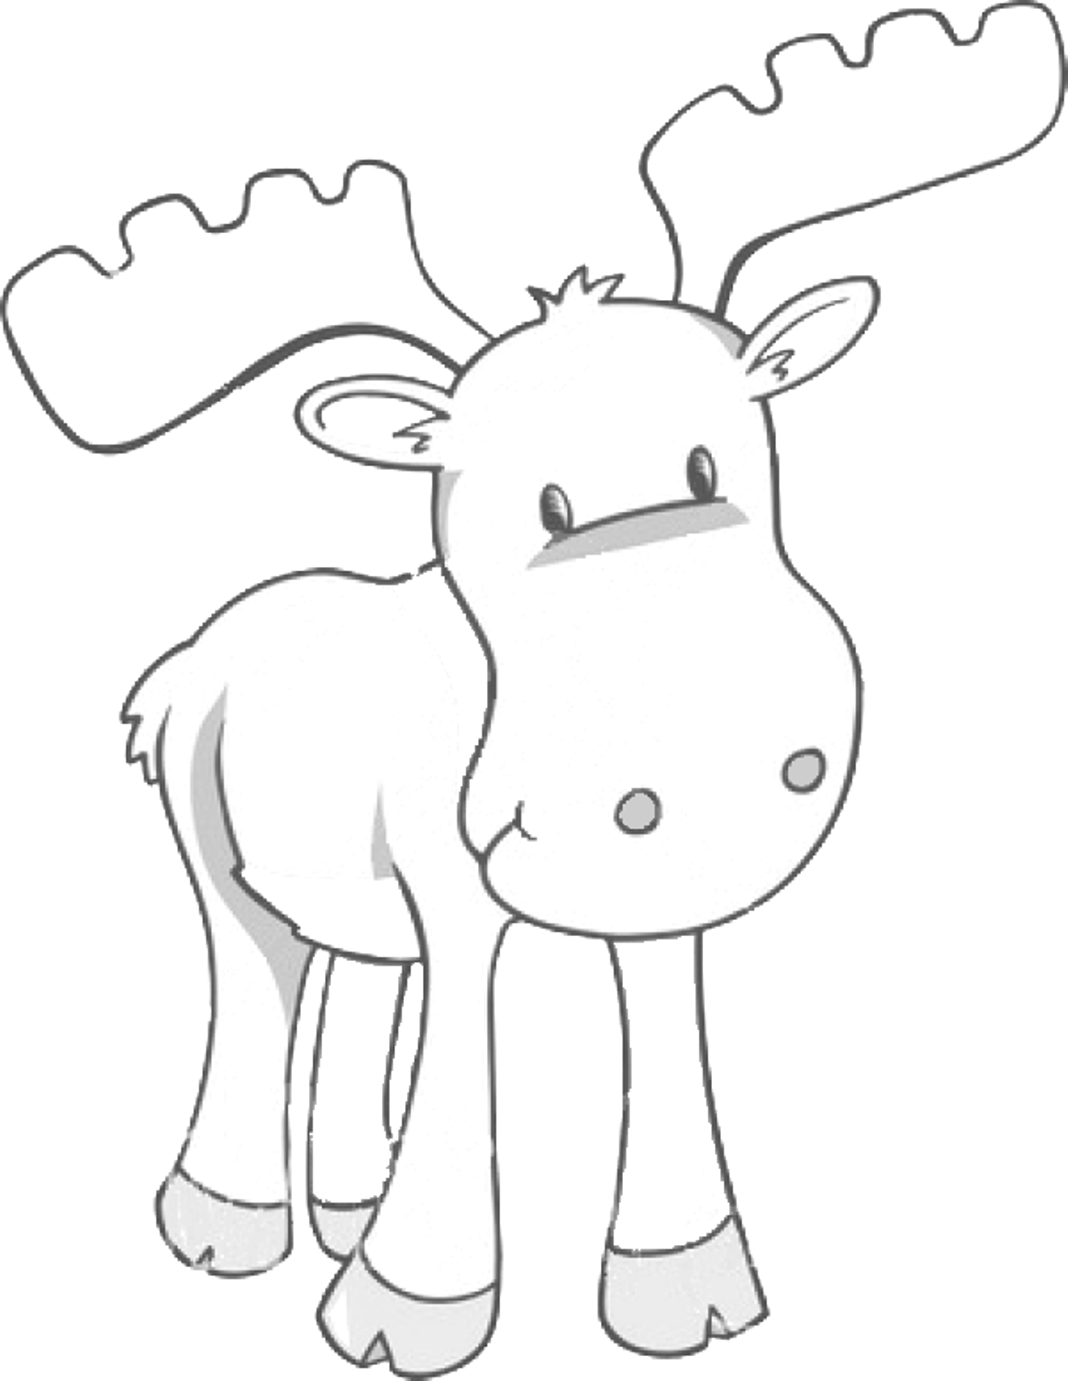 Moose Coloring Pages To Print